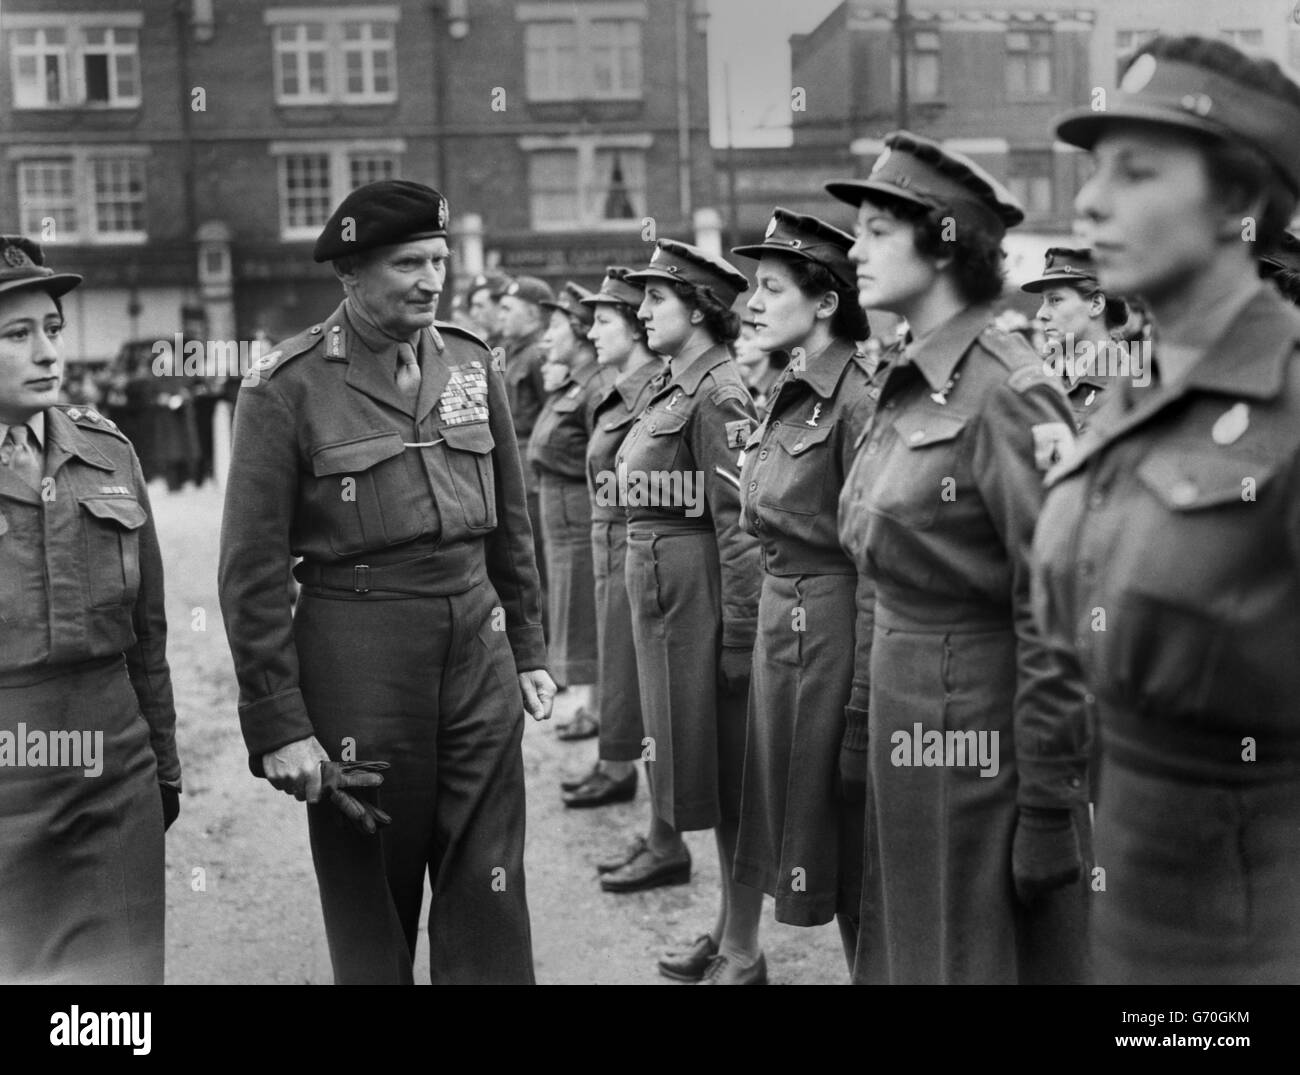 Military - Women's Royal Army Corps - Field Marshal Viscount Stock ...